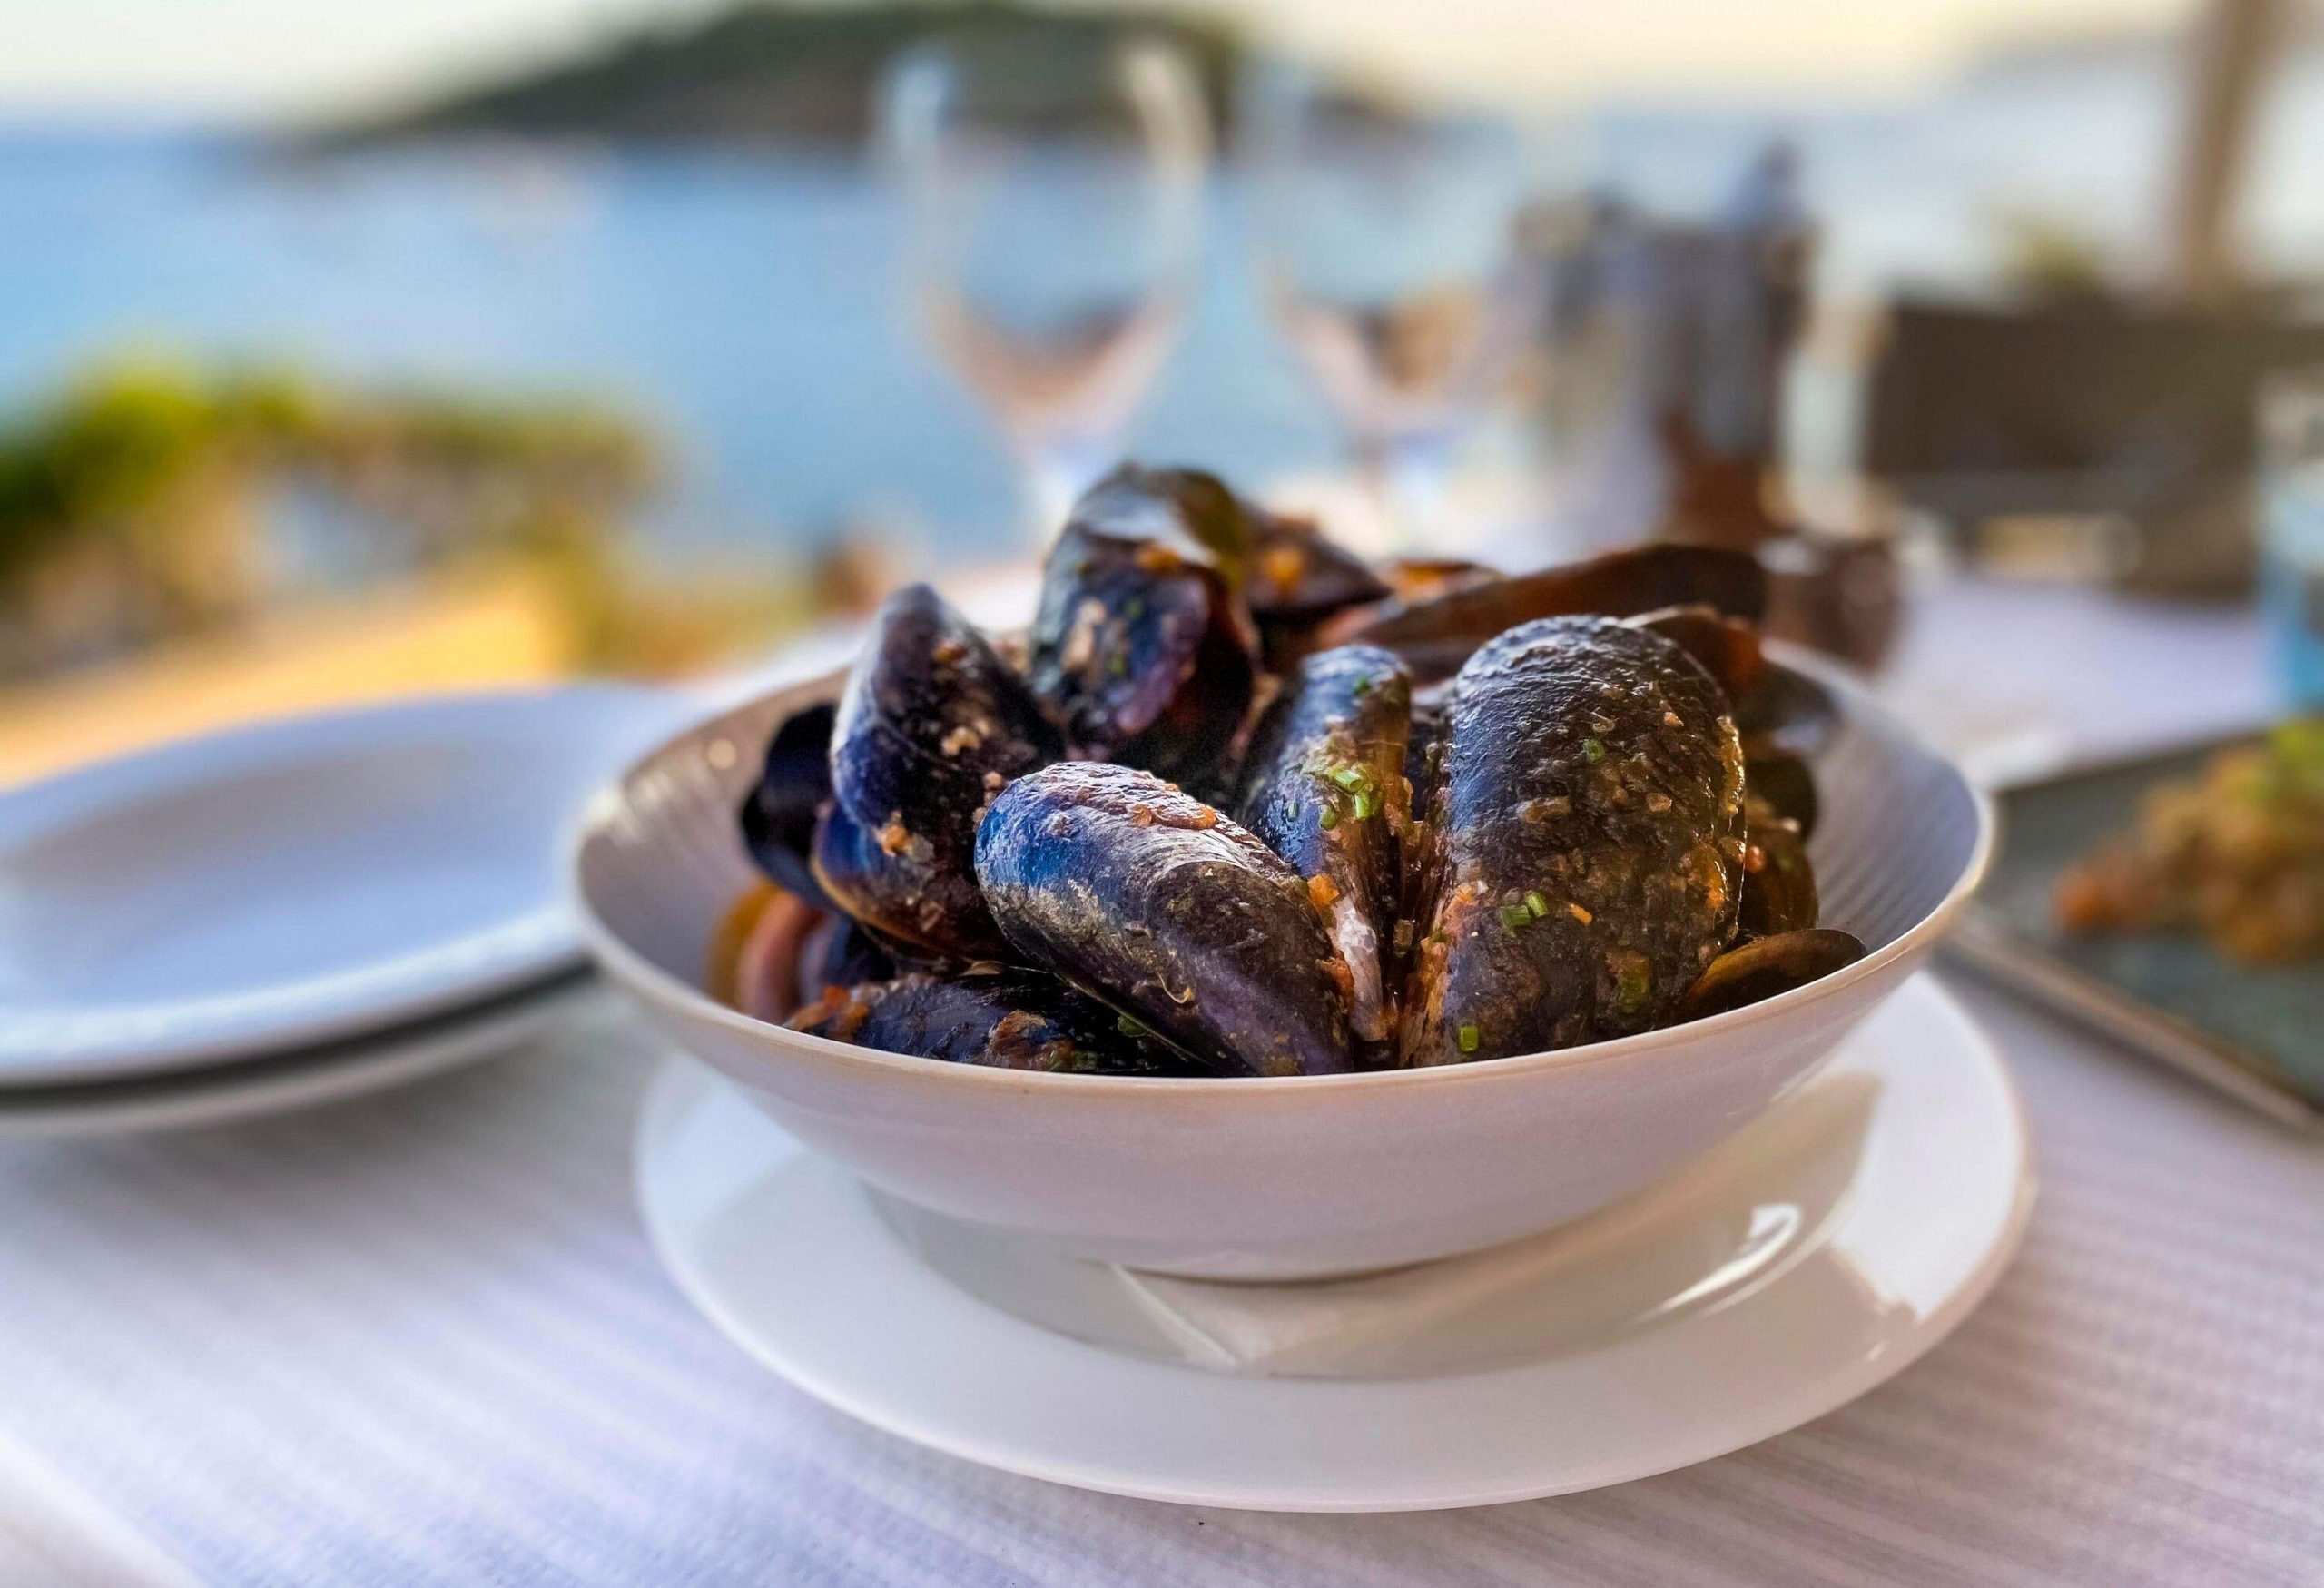 A bowl of delicious mussels served on the table.